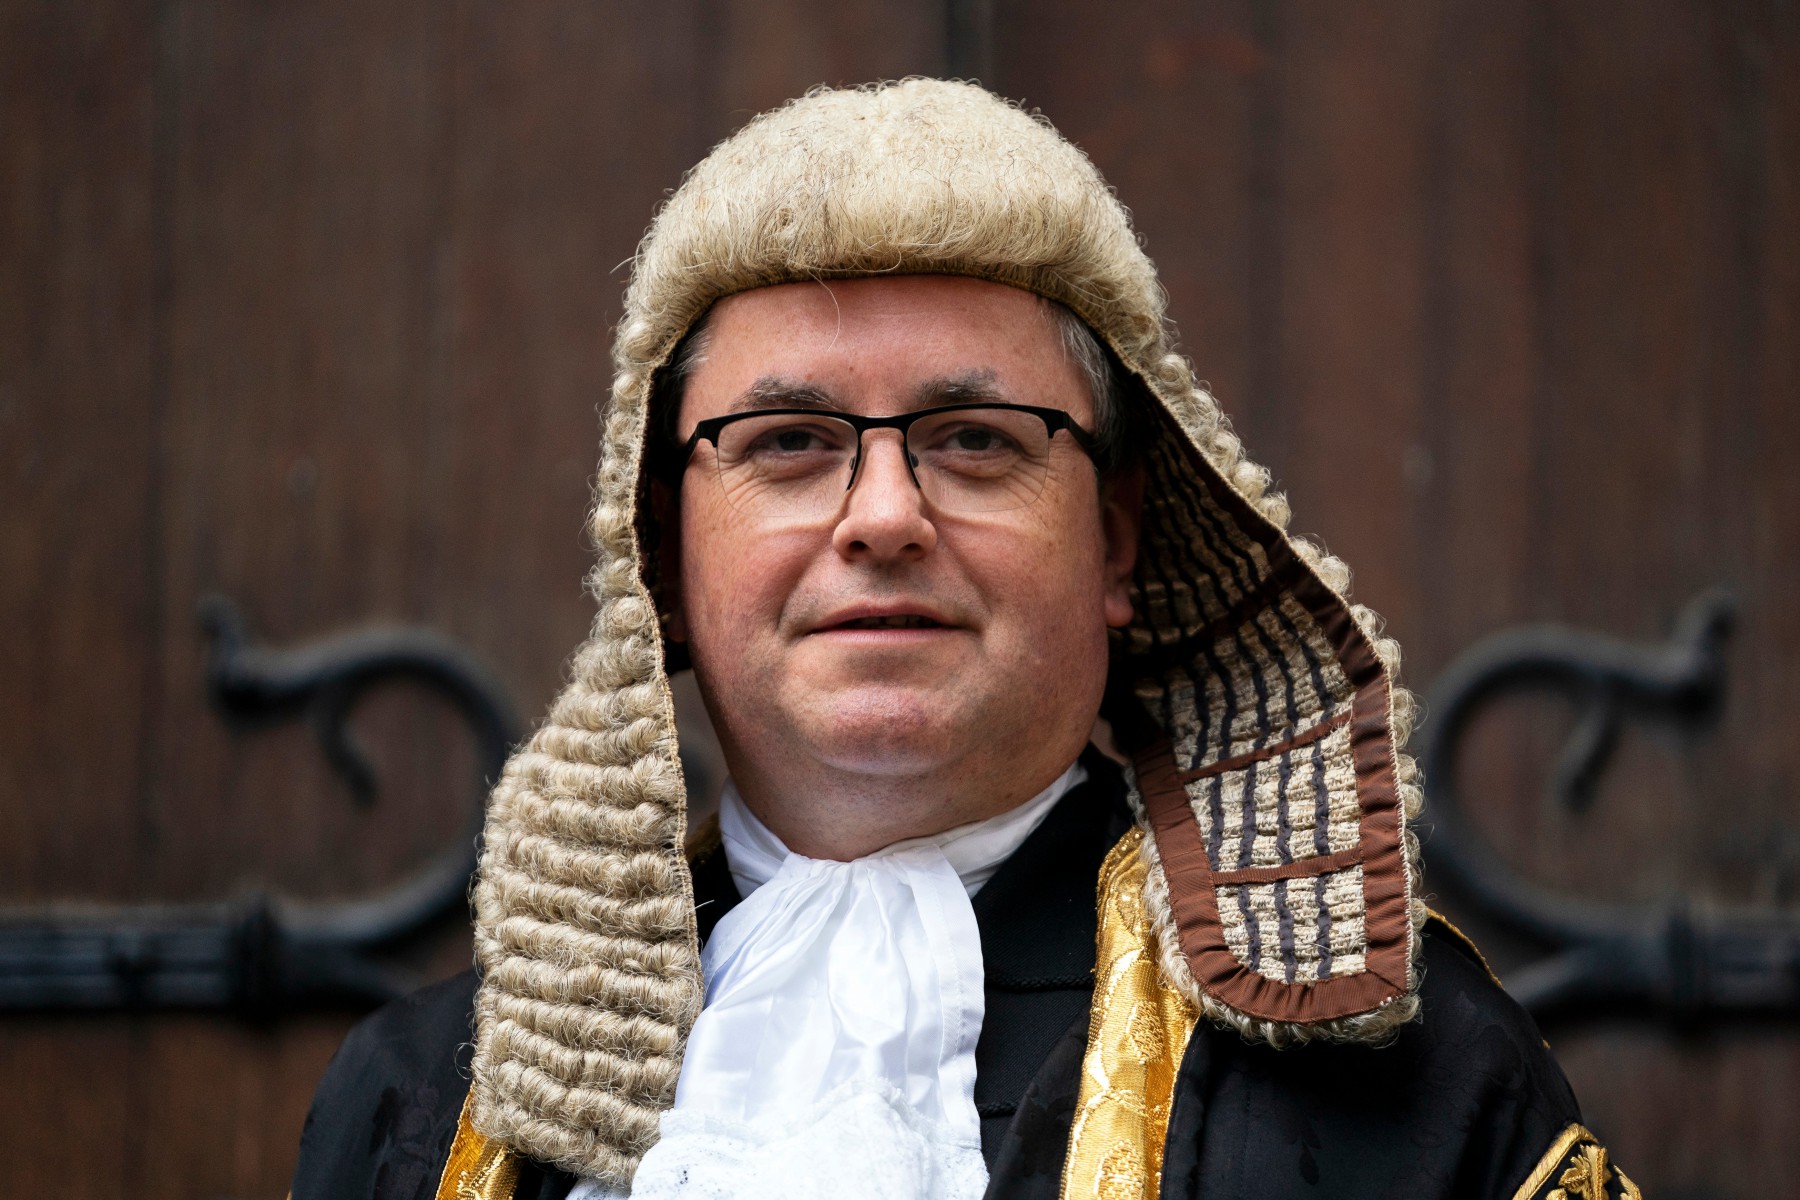 Justice Secretary Robert Buckland said authorities were powerless to stop convicted terrorists due to be released early from going free